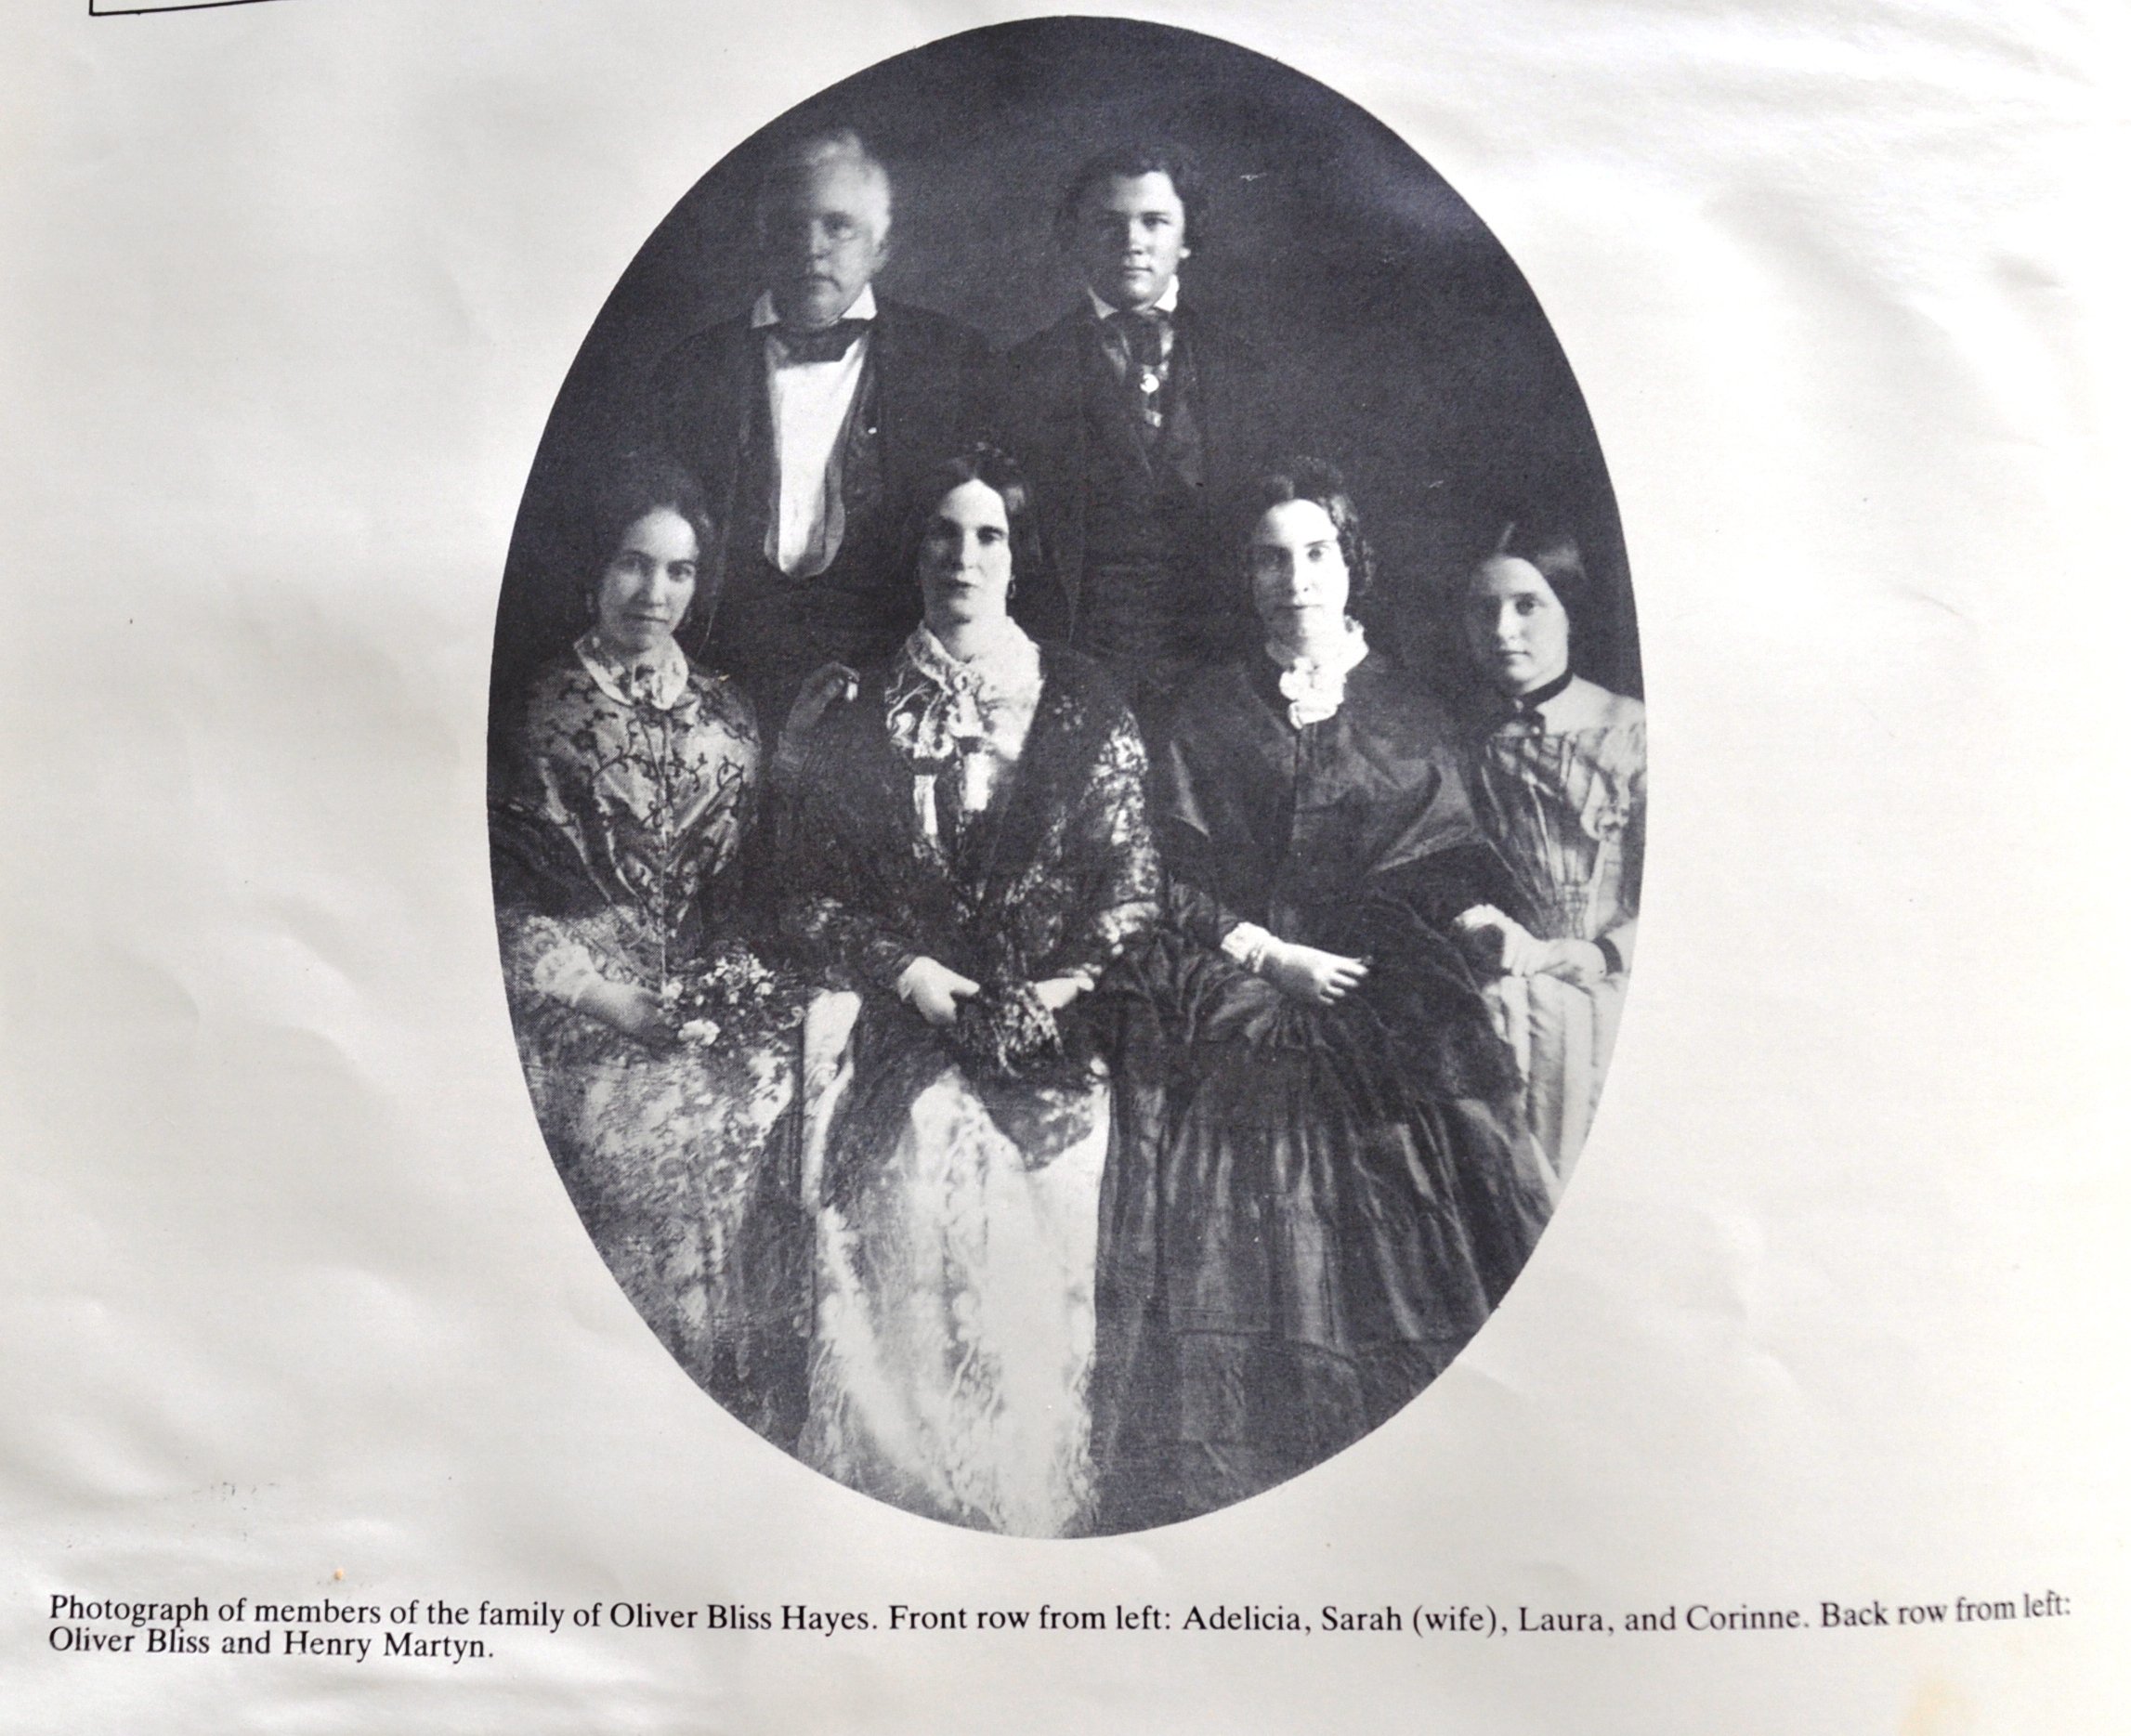 A photo of the author's ancestors. Adelicia is pictured on the far left while Corinne is on the far right.